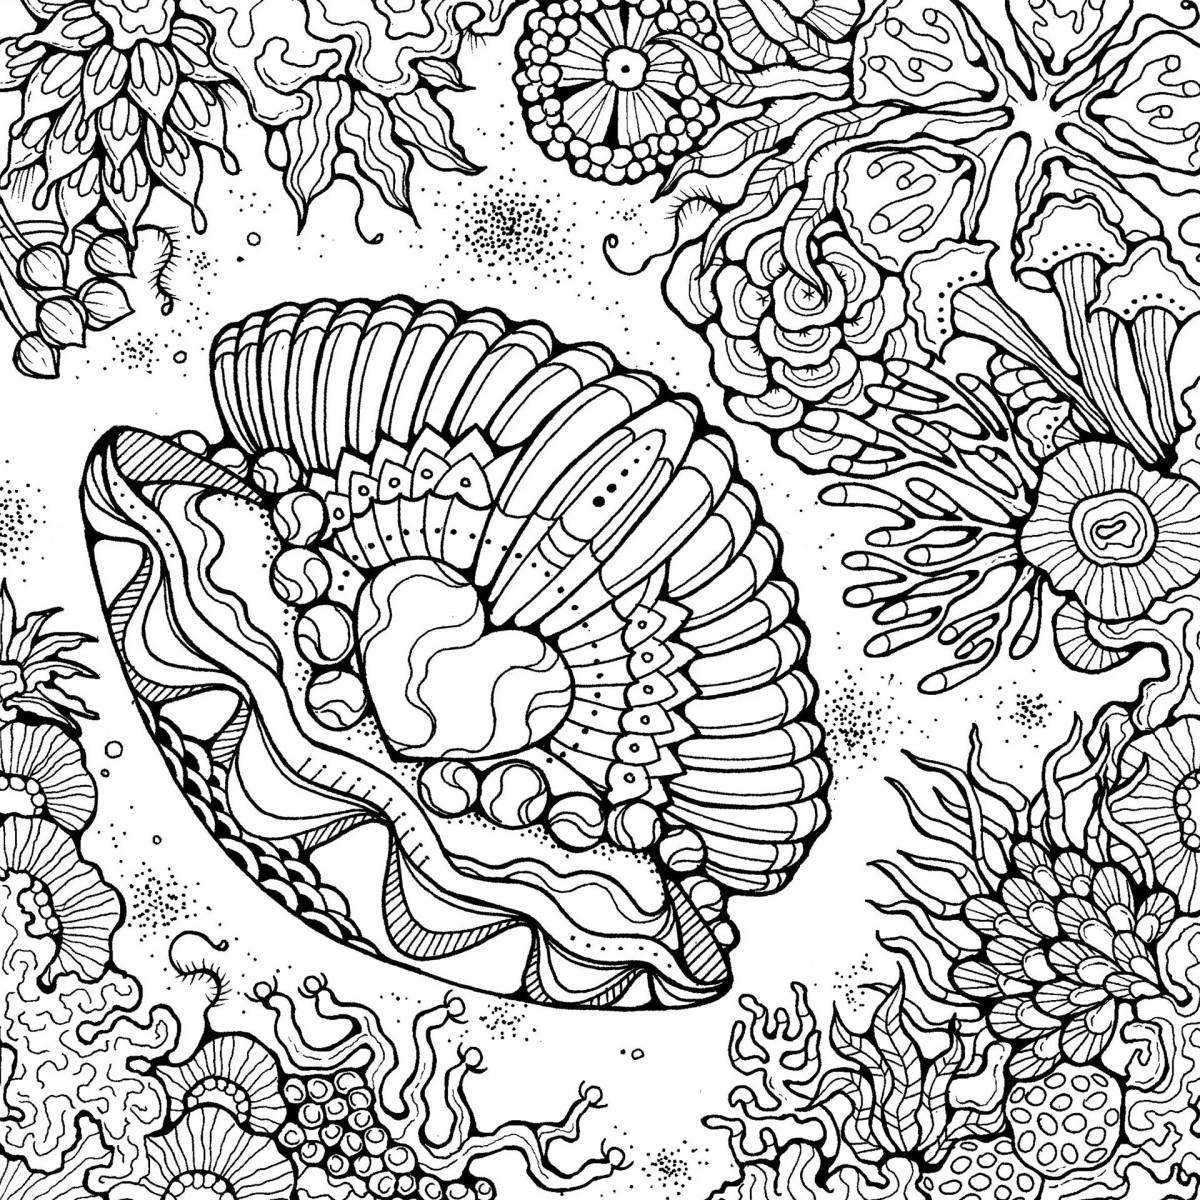 Radiant coloring page relax living patterns